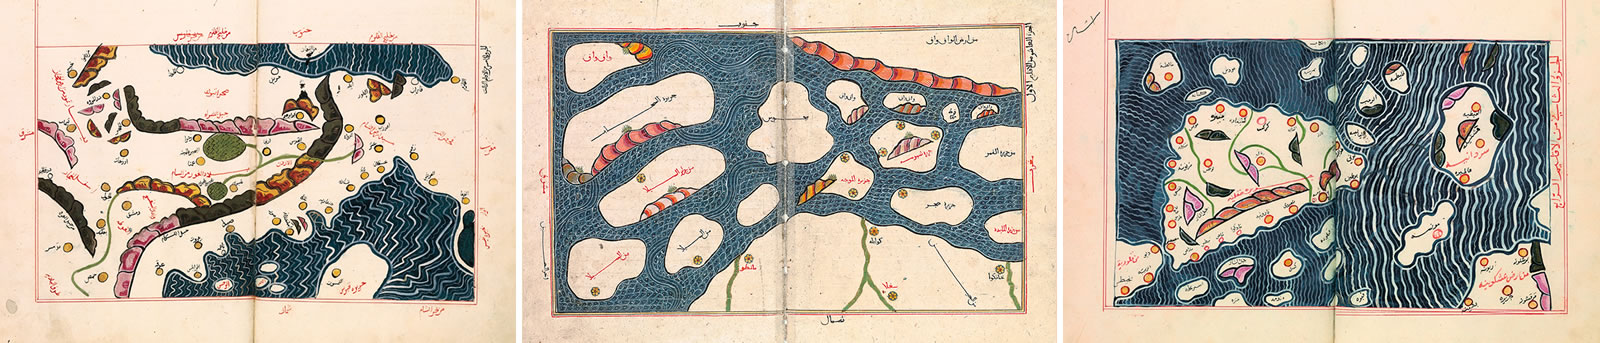 Three 16th-century copies of al-Idrisi’s original folios show, from left, Cyprus and the Levant, part of the east coast of China, and Sicily.